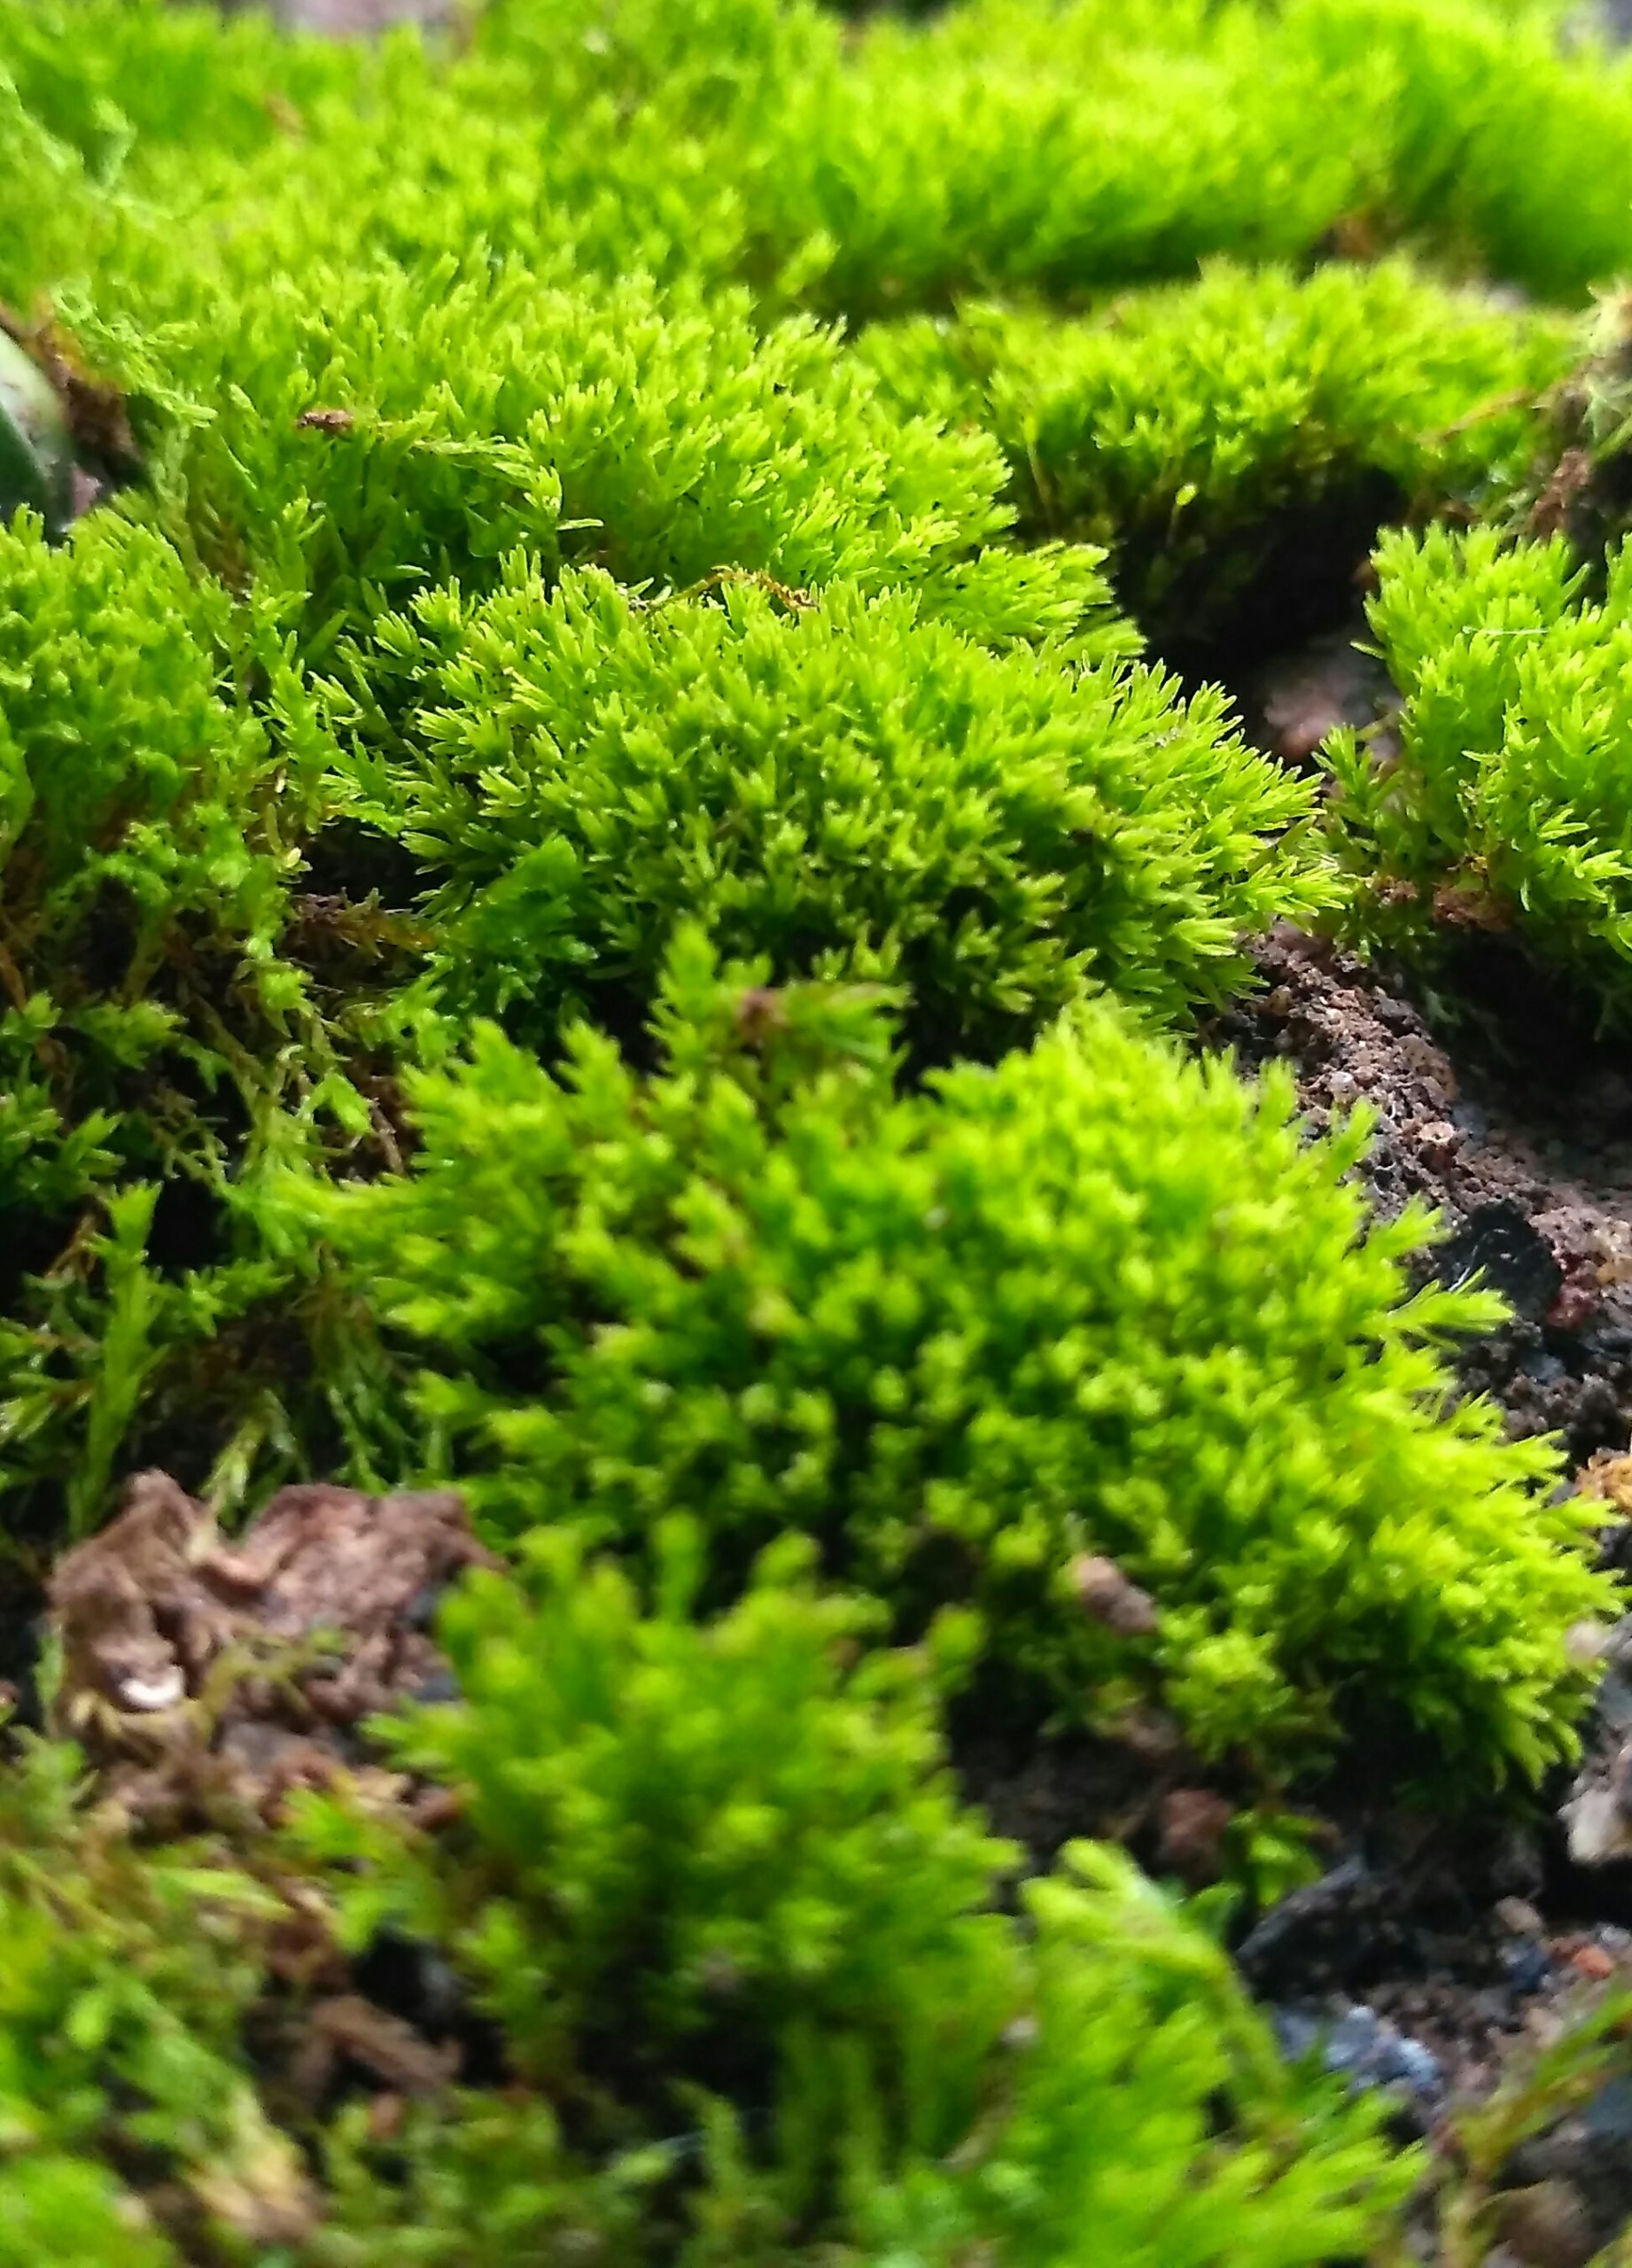 Green moss on a surface